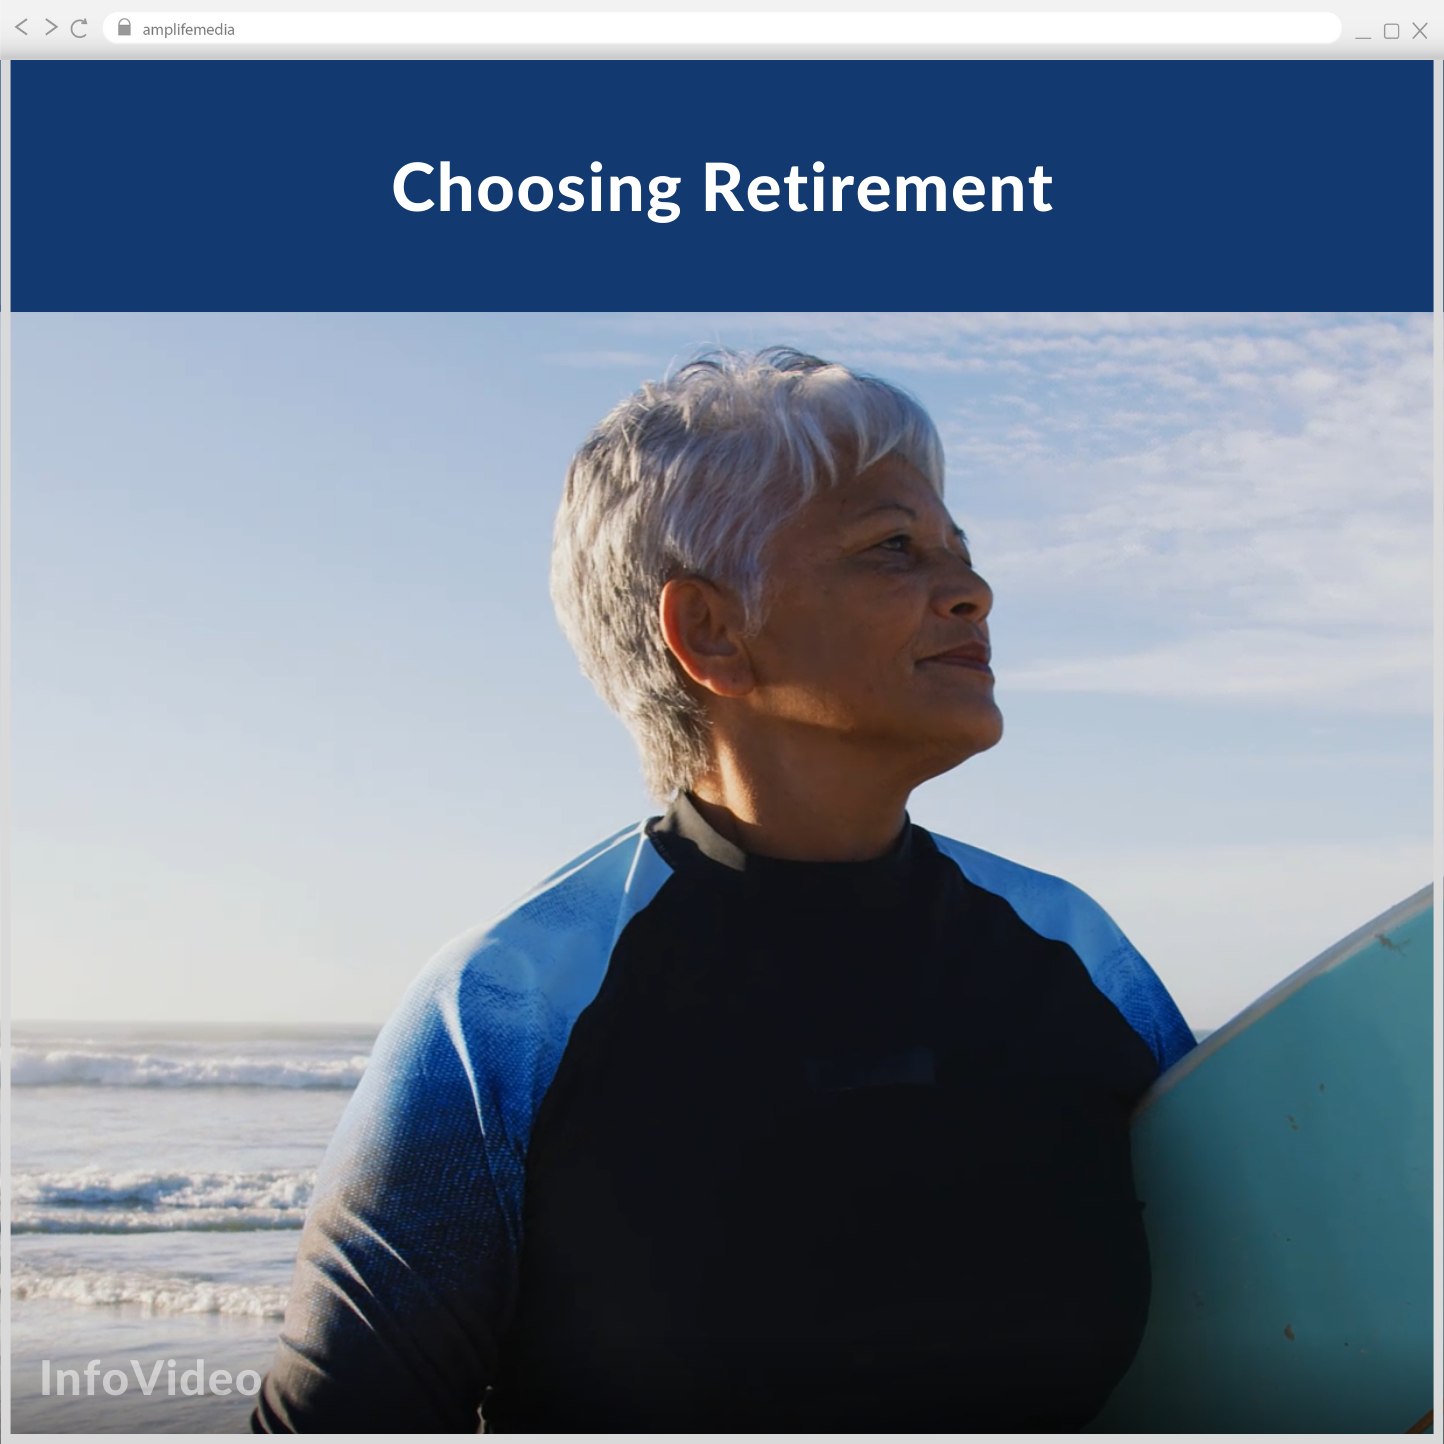 Subscription to Wellbeing Media: Choosing Retirement IV 821